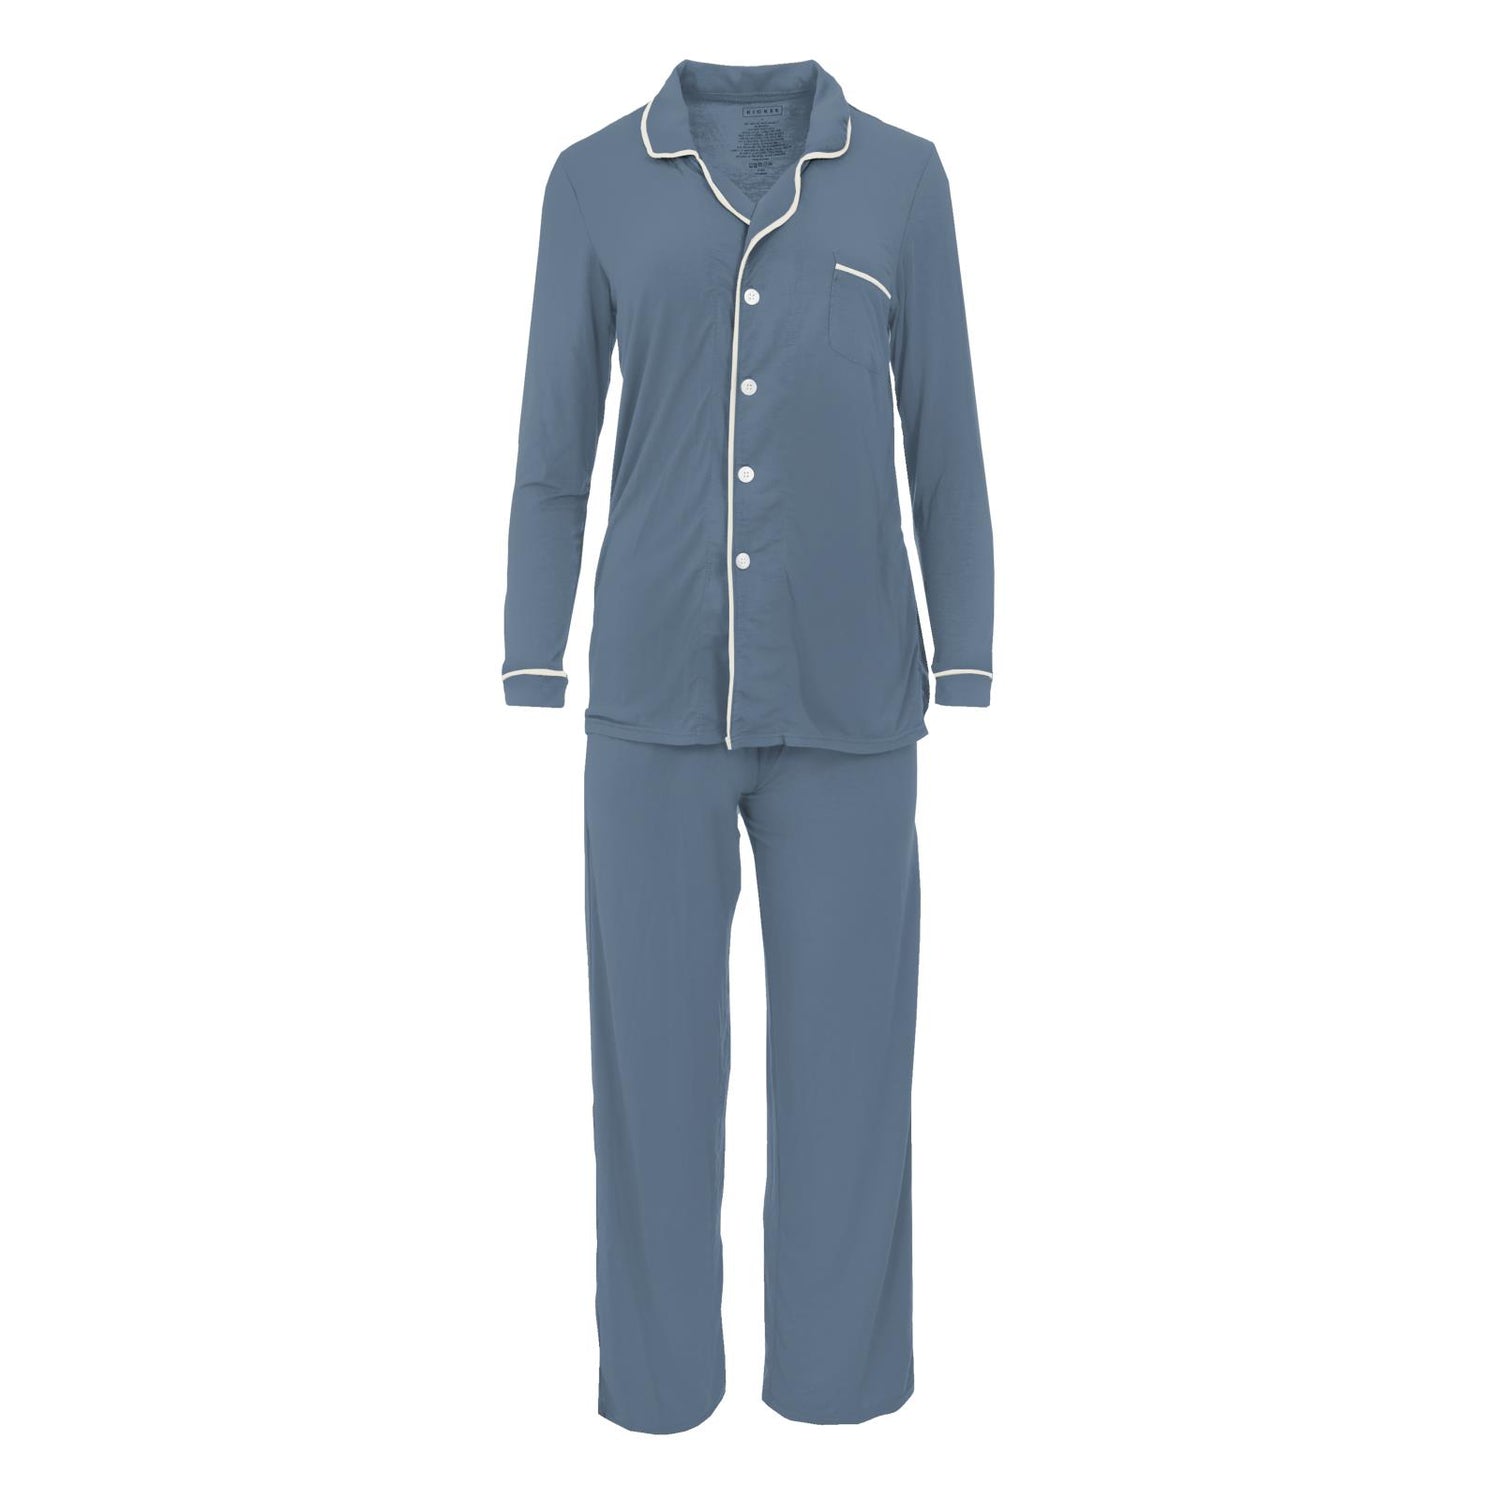 Women's Long Sleeve Collared Pajama Set in Parisian Blue with Natural